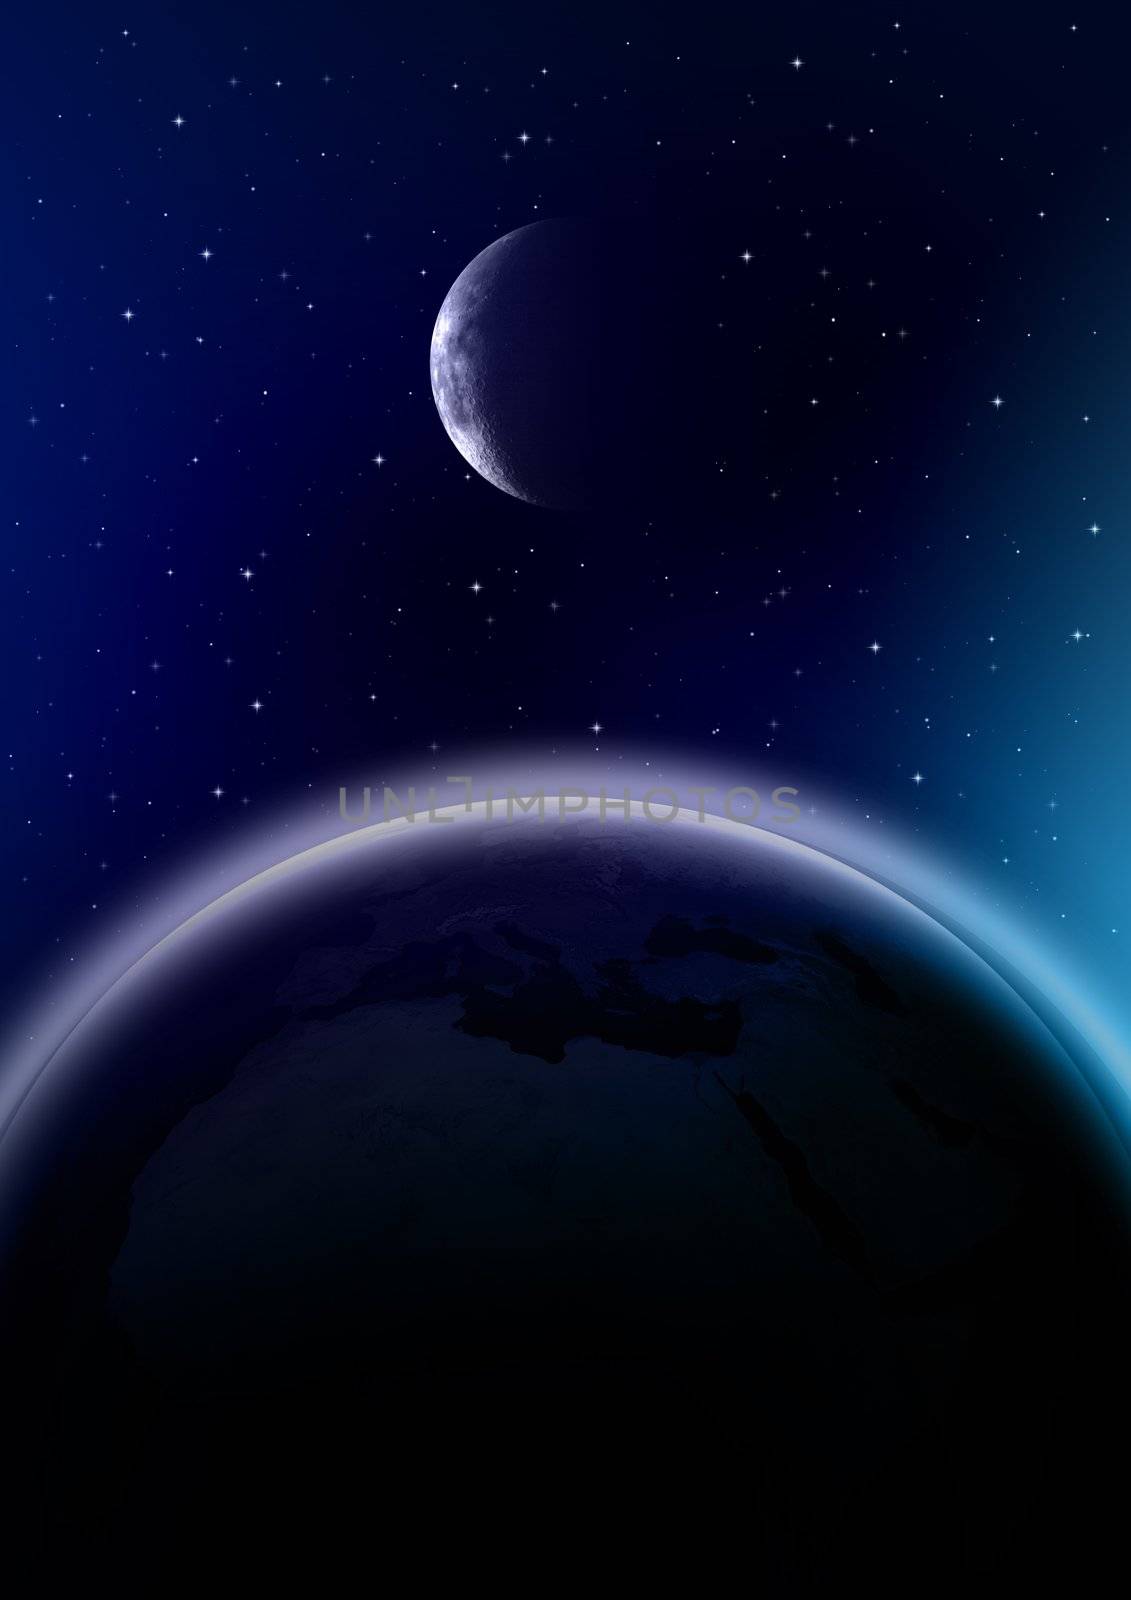 Outer space illustration with earth and moon.